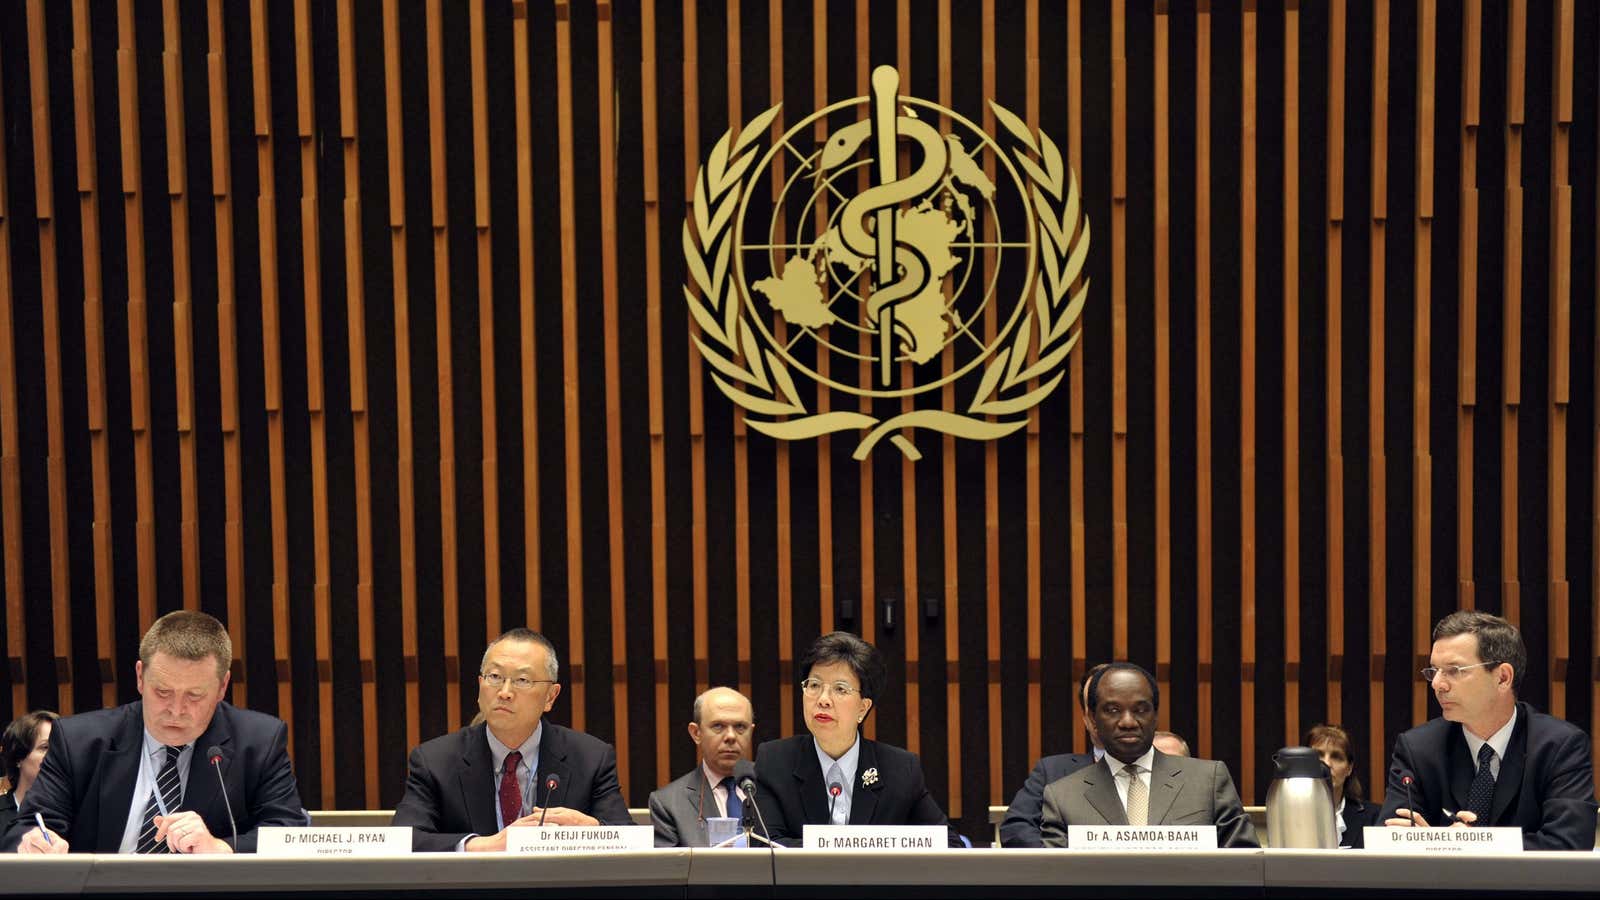 Representatives of WHO speak at a news conference about the H1N1 Influenza outbreak in 2009.